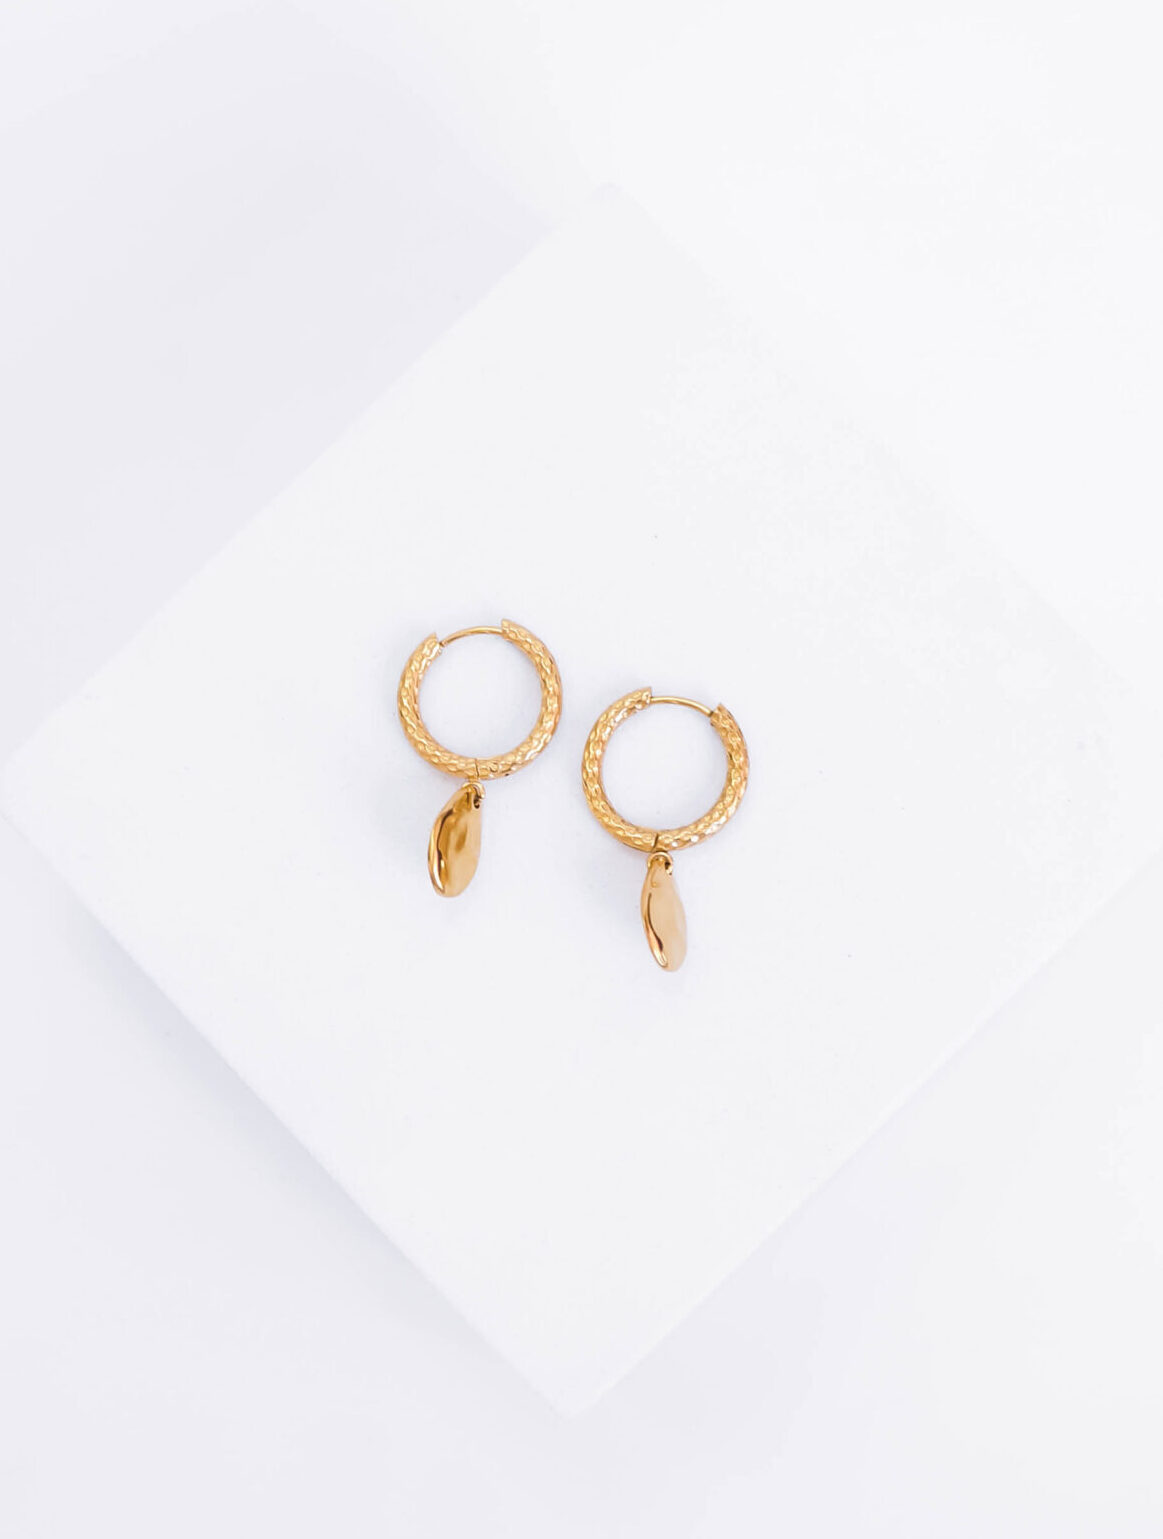 Gold-plated hoops with pendants - gg unique